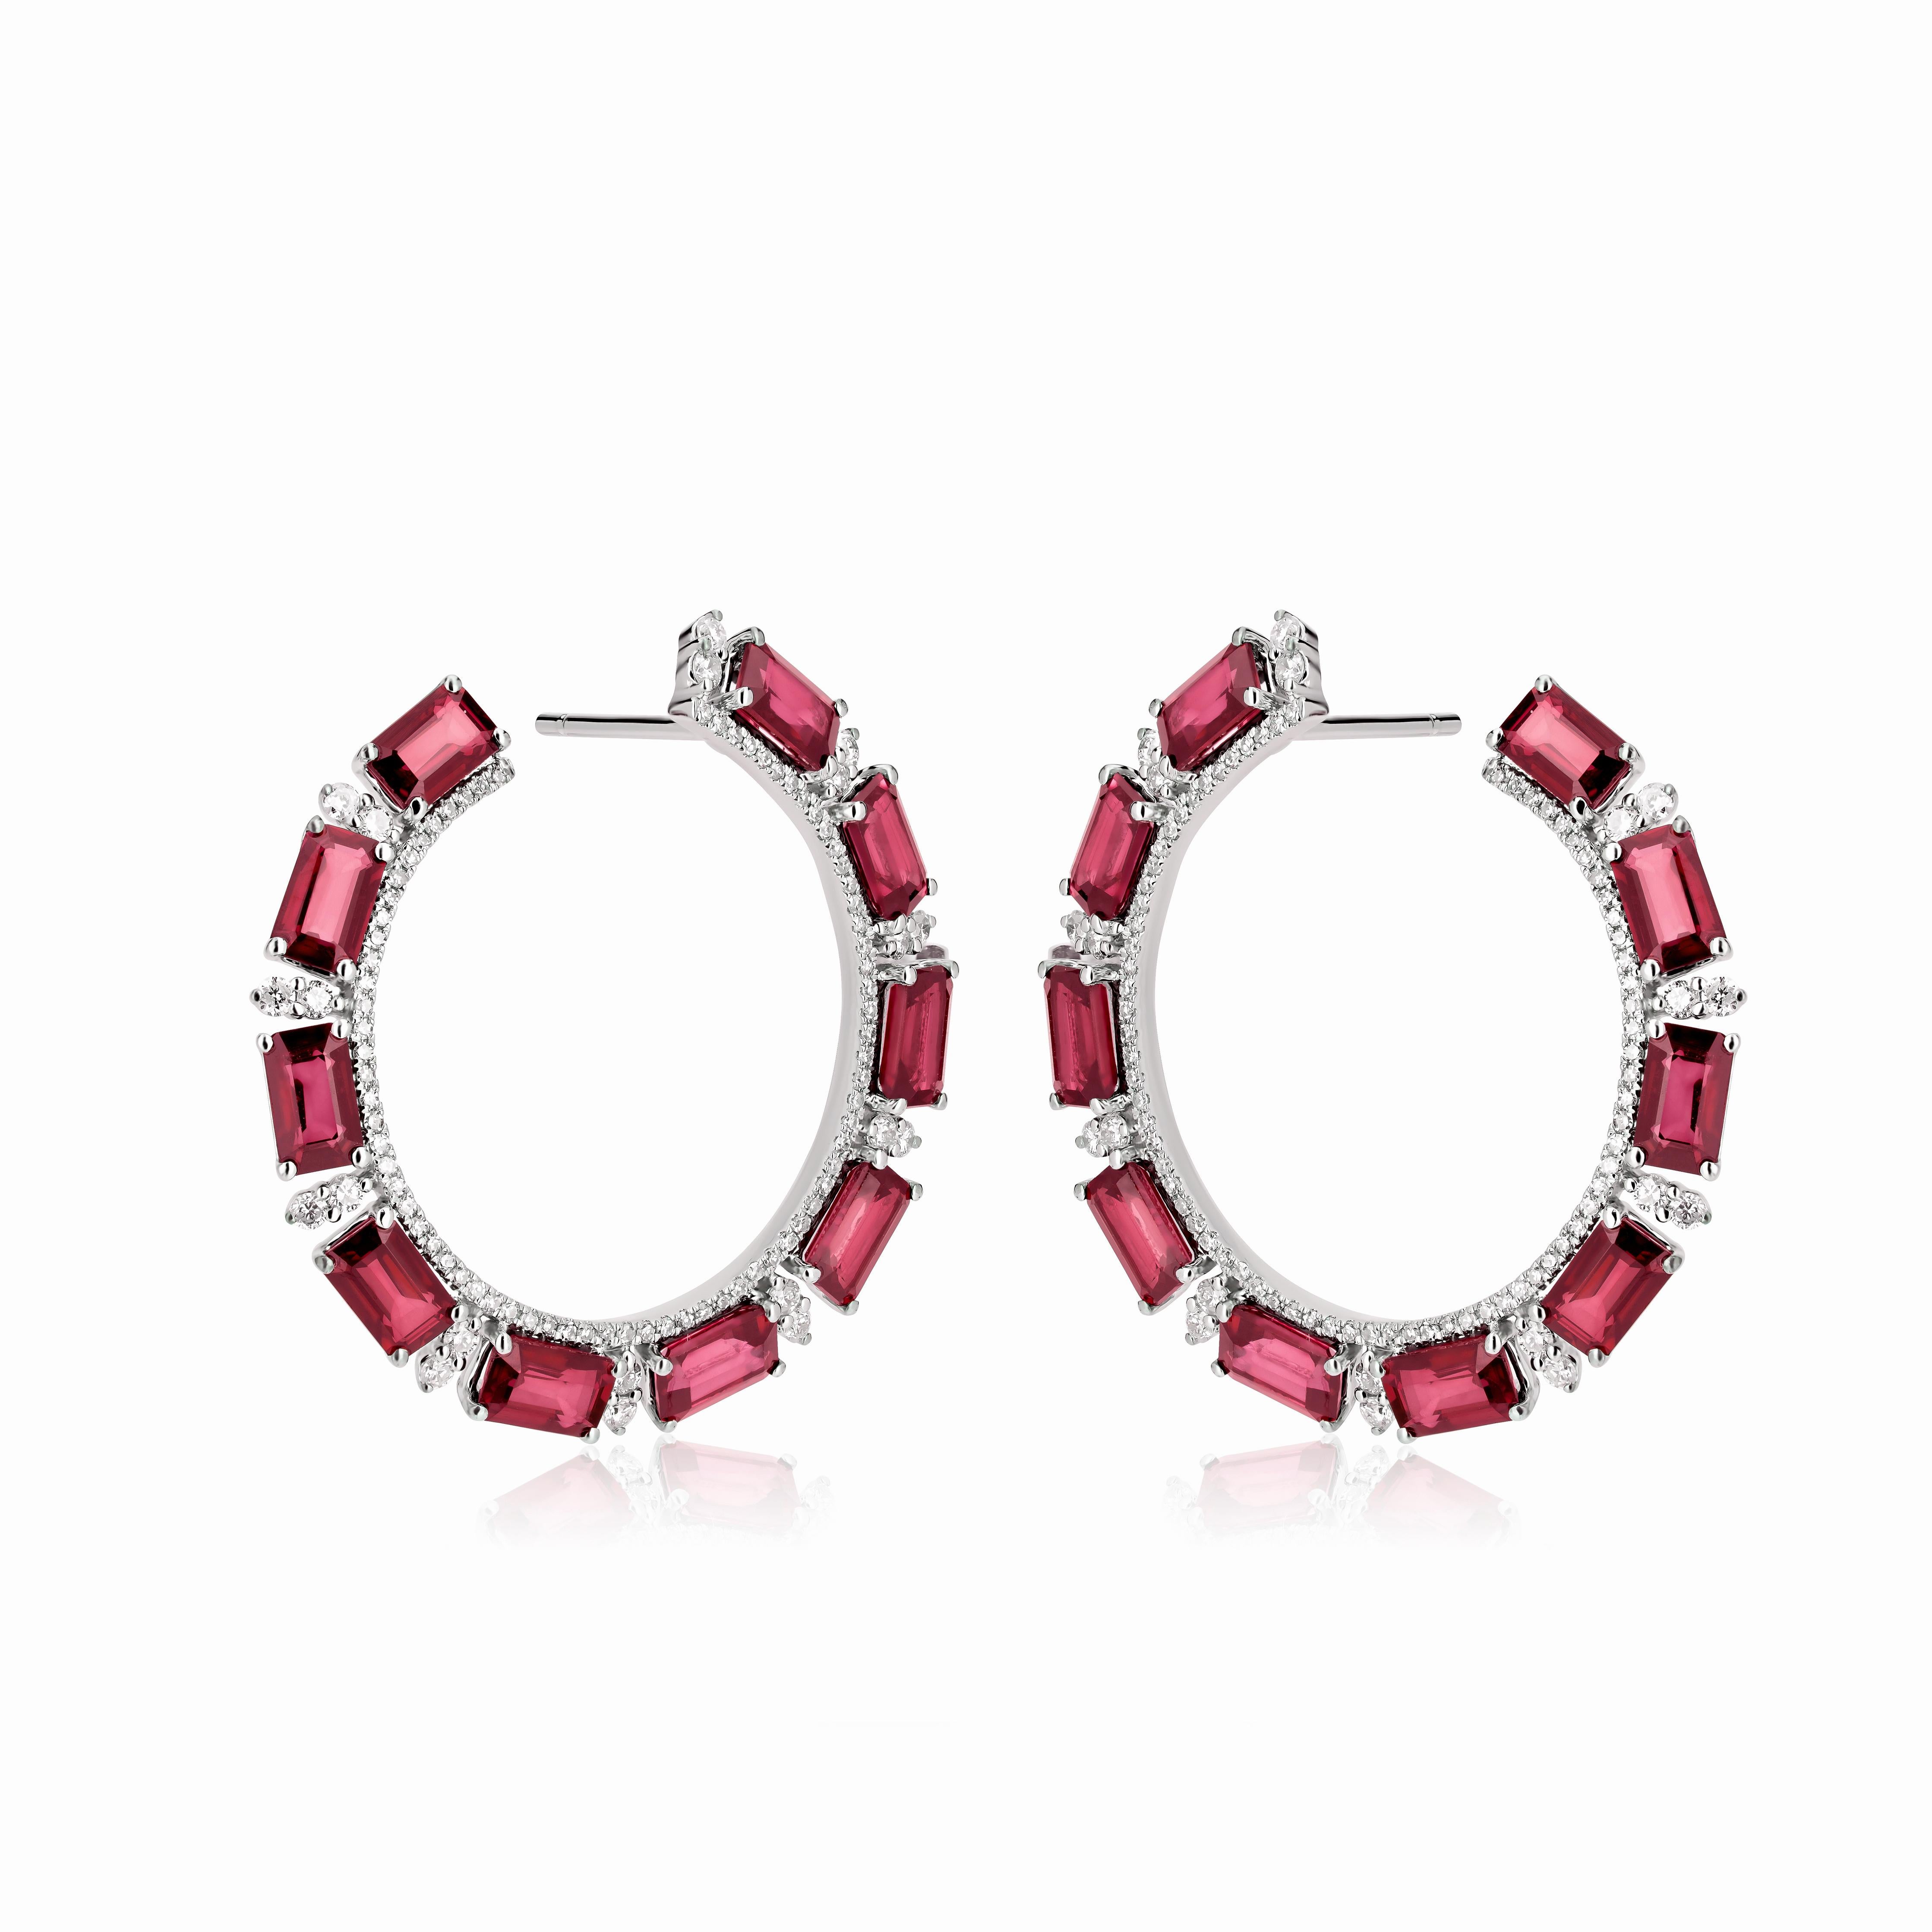 This Gemistry hoop earring is made on an 18K White Gold with round single-cut and full-cut white diamonds in micro pave and illusion setting. In addition to the sparkling diamonds, this beautiful pair has twenty octagon-cut rubies in a prong